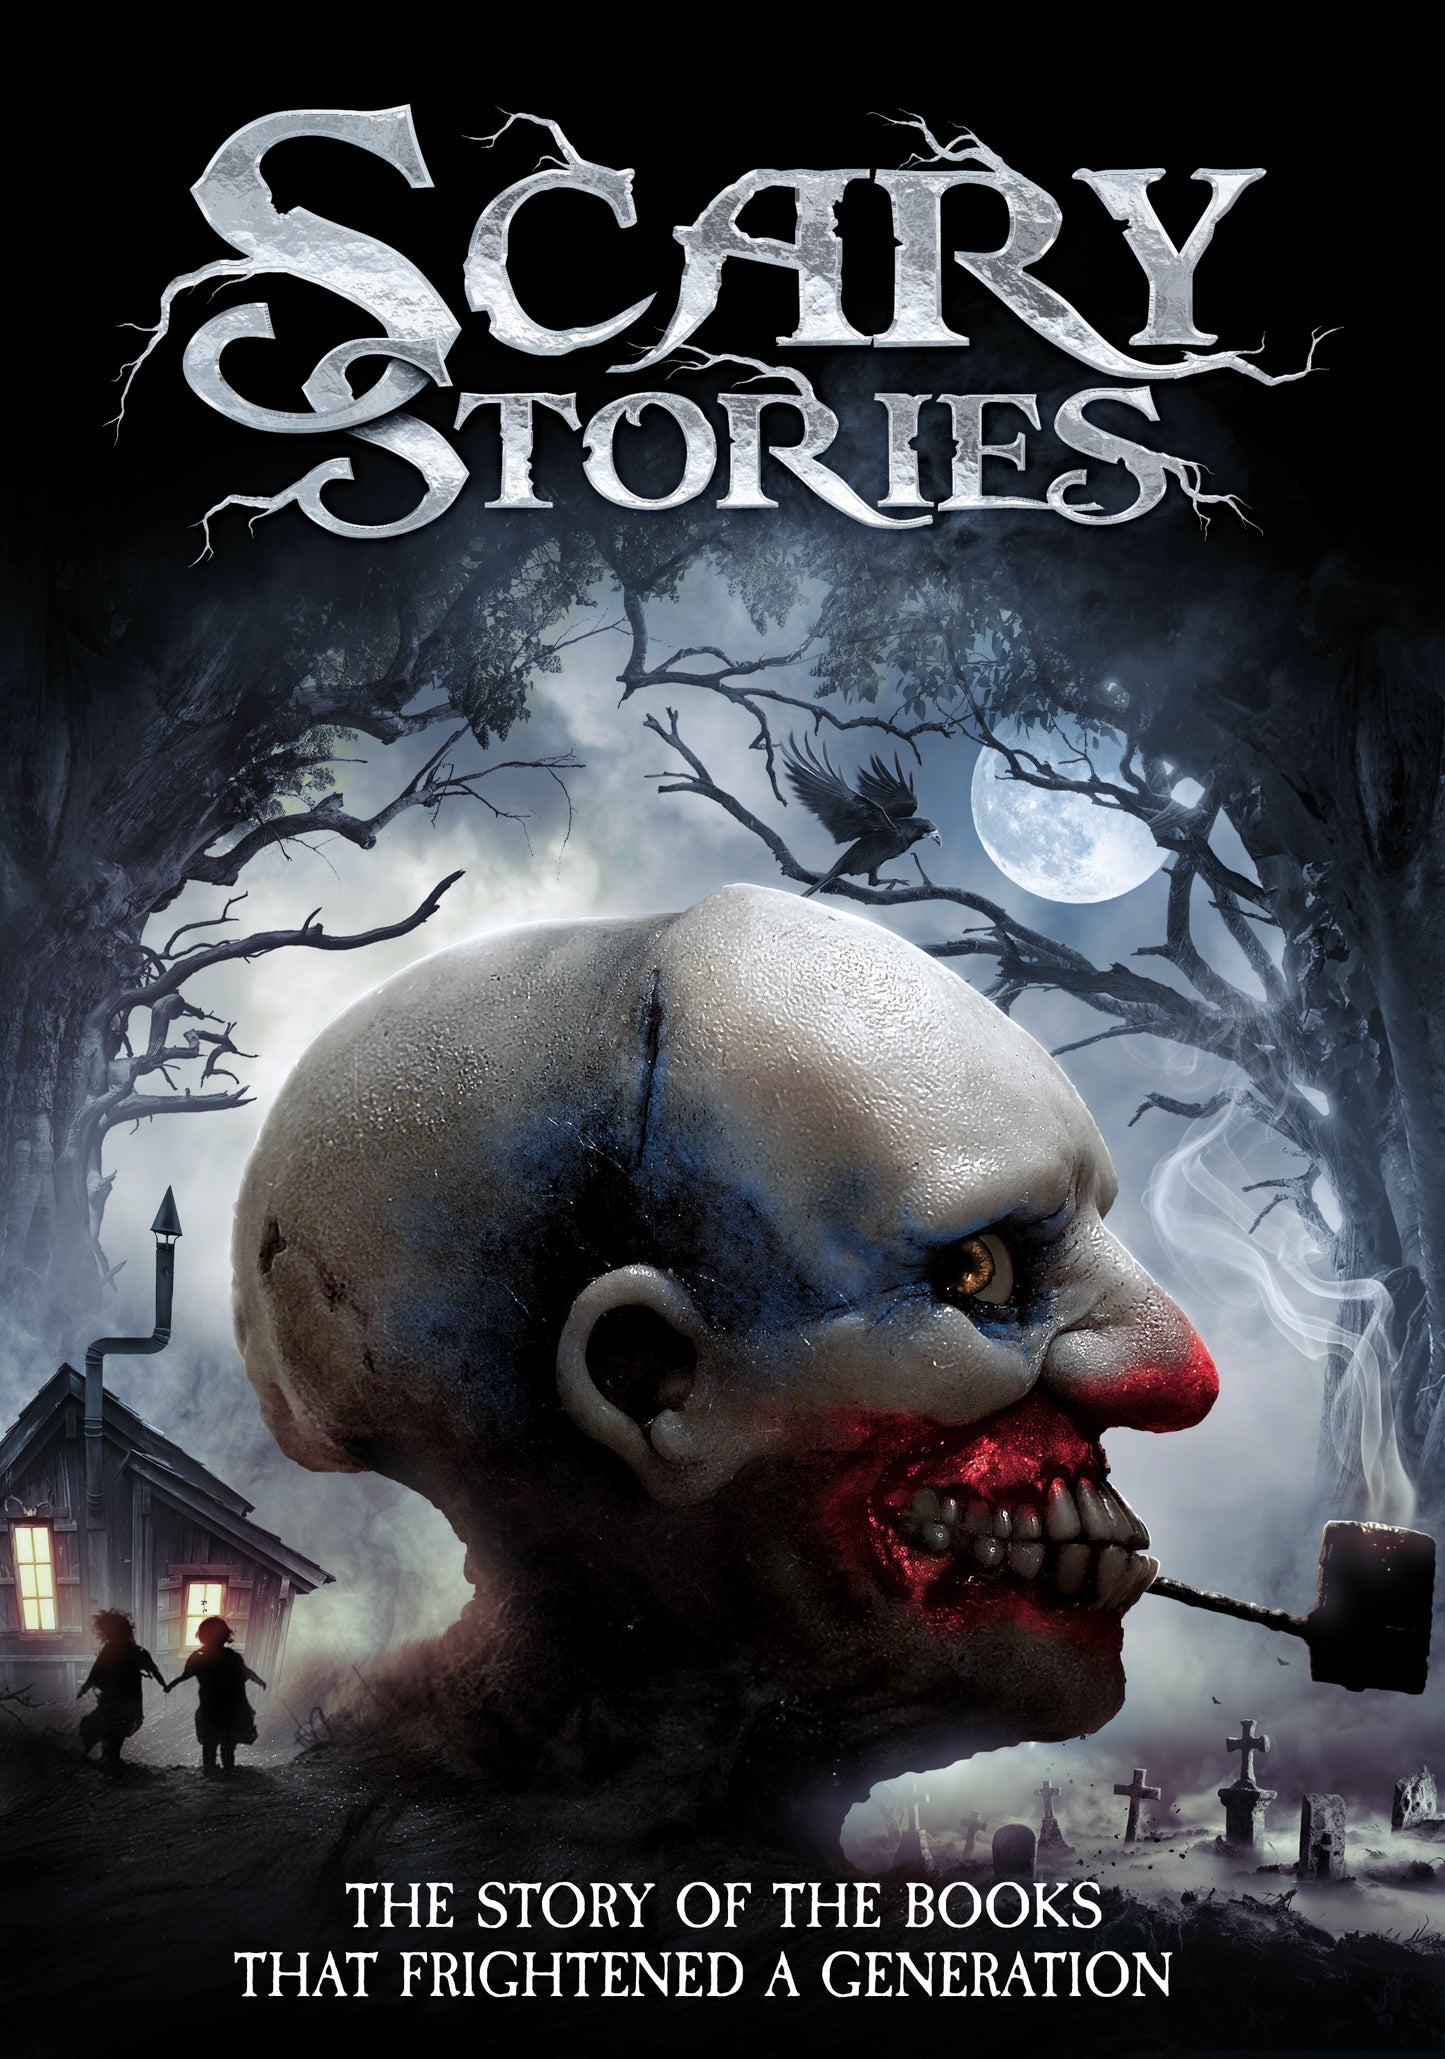 Scary Stories cover art